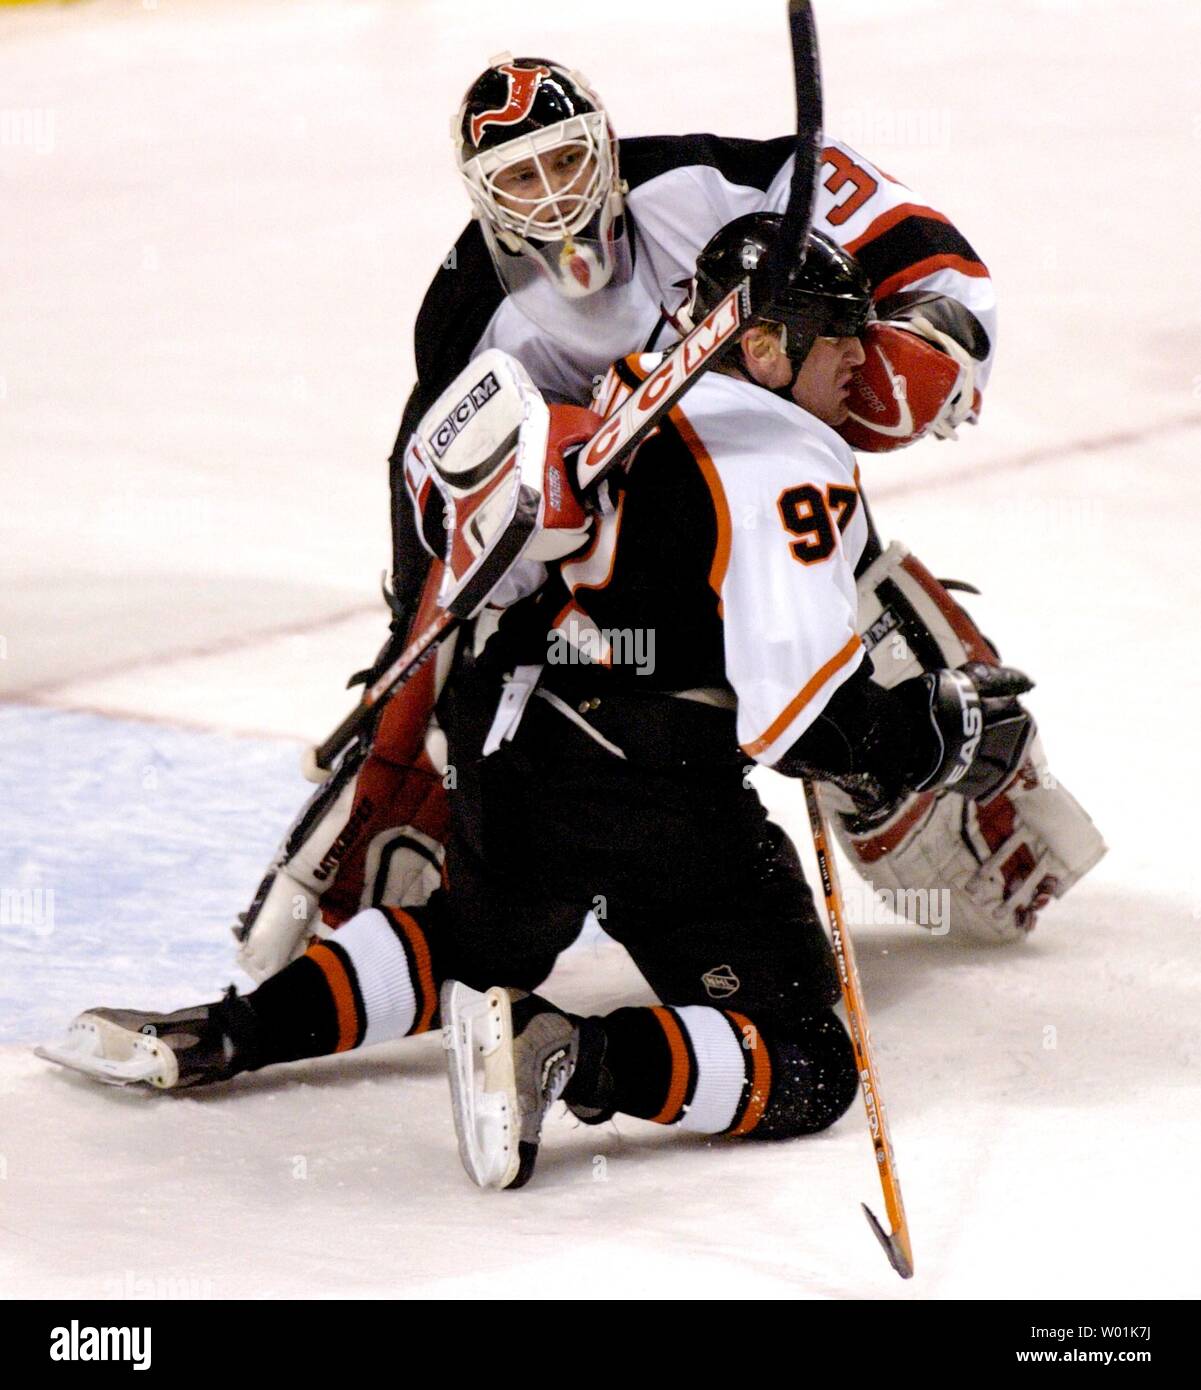 The Flyers' Jeremy Roenick (97) takes a shot on his recently healed